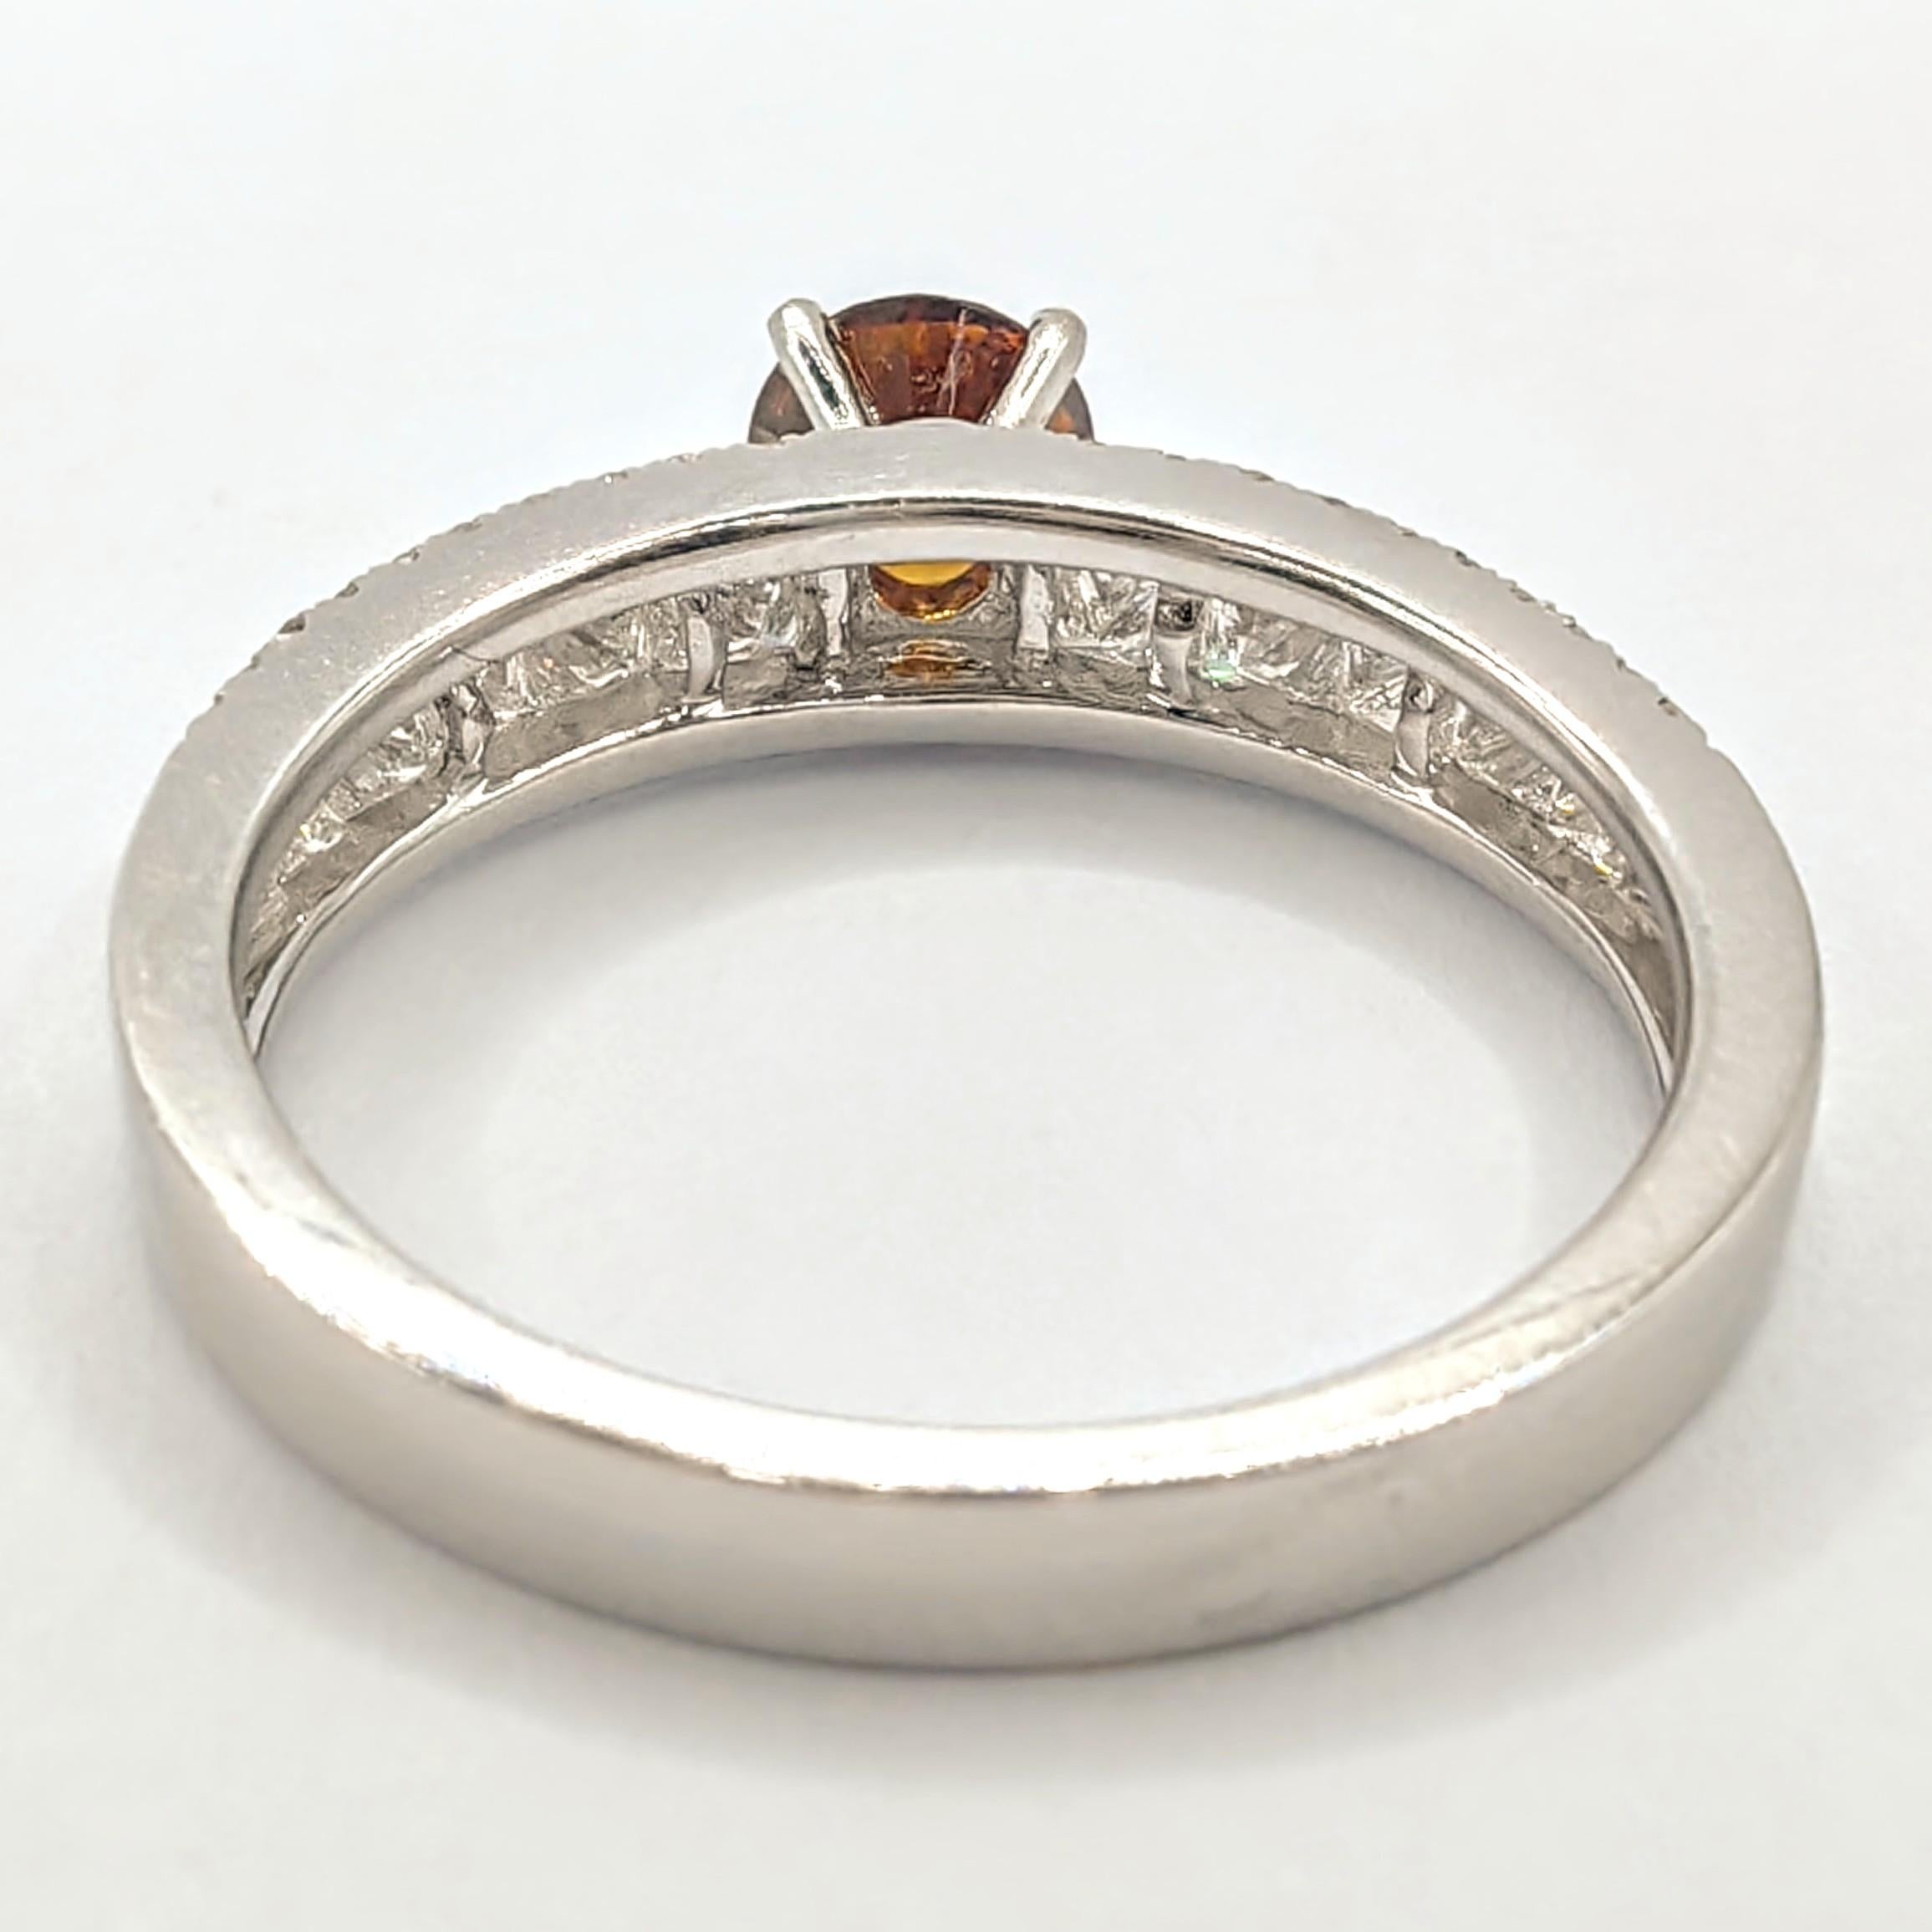 Contemporary GIA Certified .51 Carat Fancy Deep Orange-Brown Diamond Ring in 18K White Gold For Sale